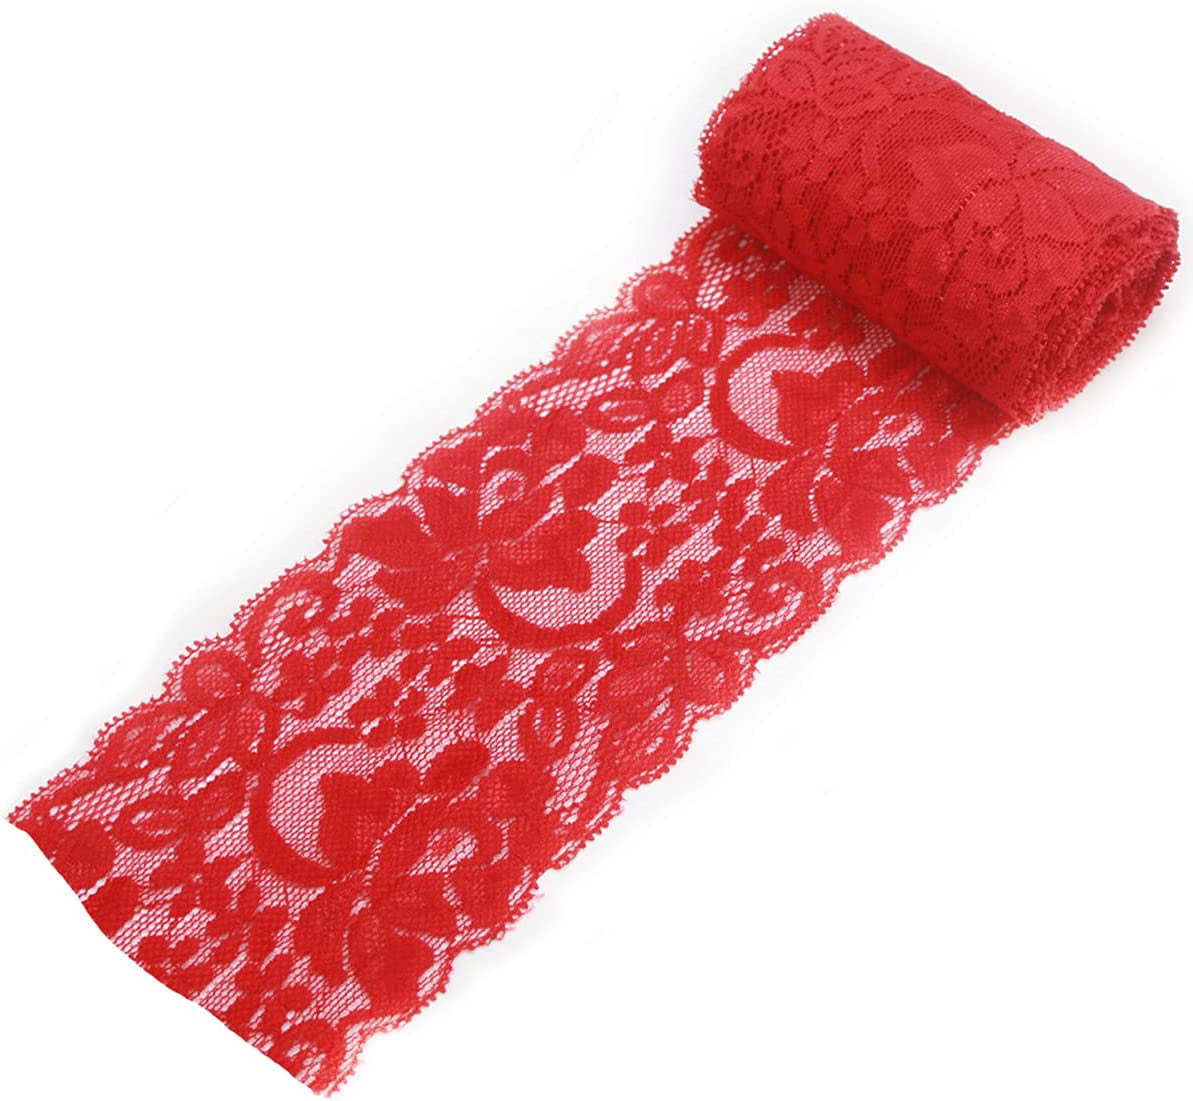 Lace Ribbon, 10 Yards Red Lace Ribbon 4cm Width Nylon Lace Ribbons for  Crafts Waves Patterns Lace Trim for Gift Package Wedding Decorations DIY  Crafts